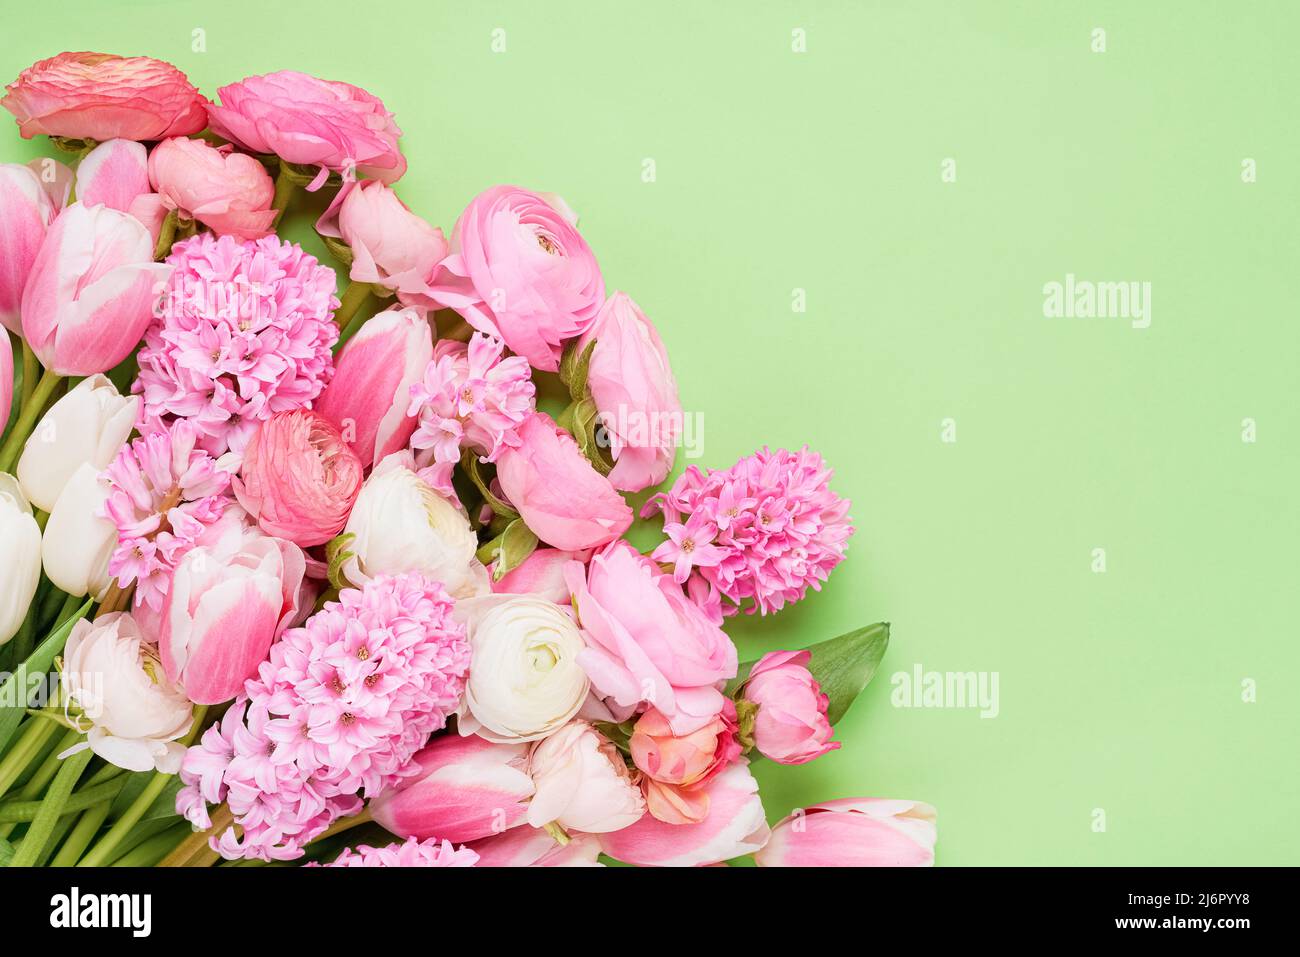 Bouquet of pink ranunculus, tulips and hyacinths on a green background. Mothers Day, Valentines Day, birthday concept. Top view, copy space Stock Photo